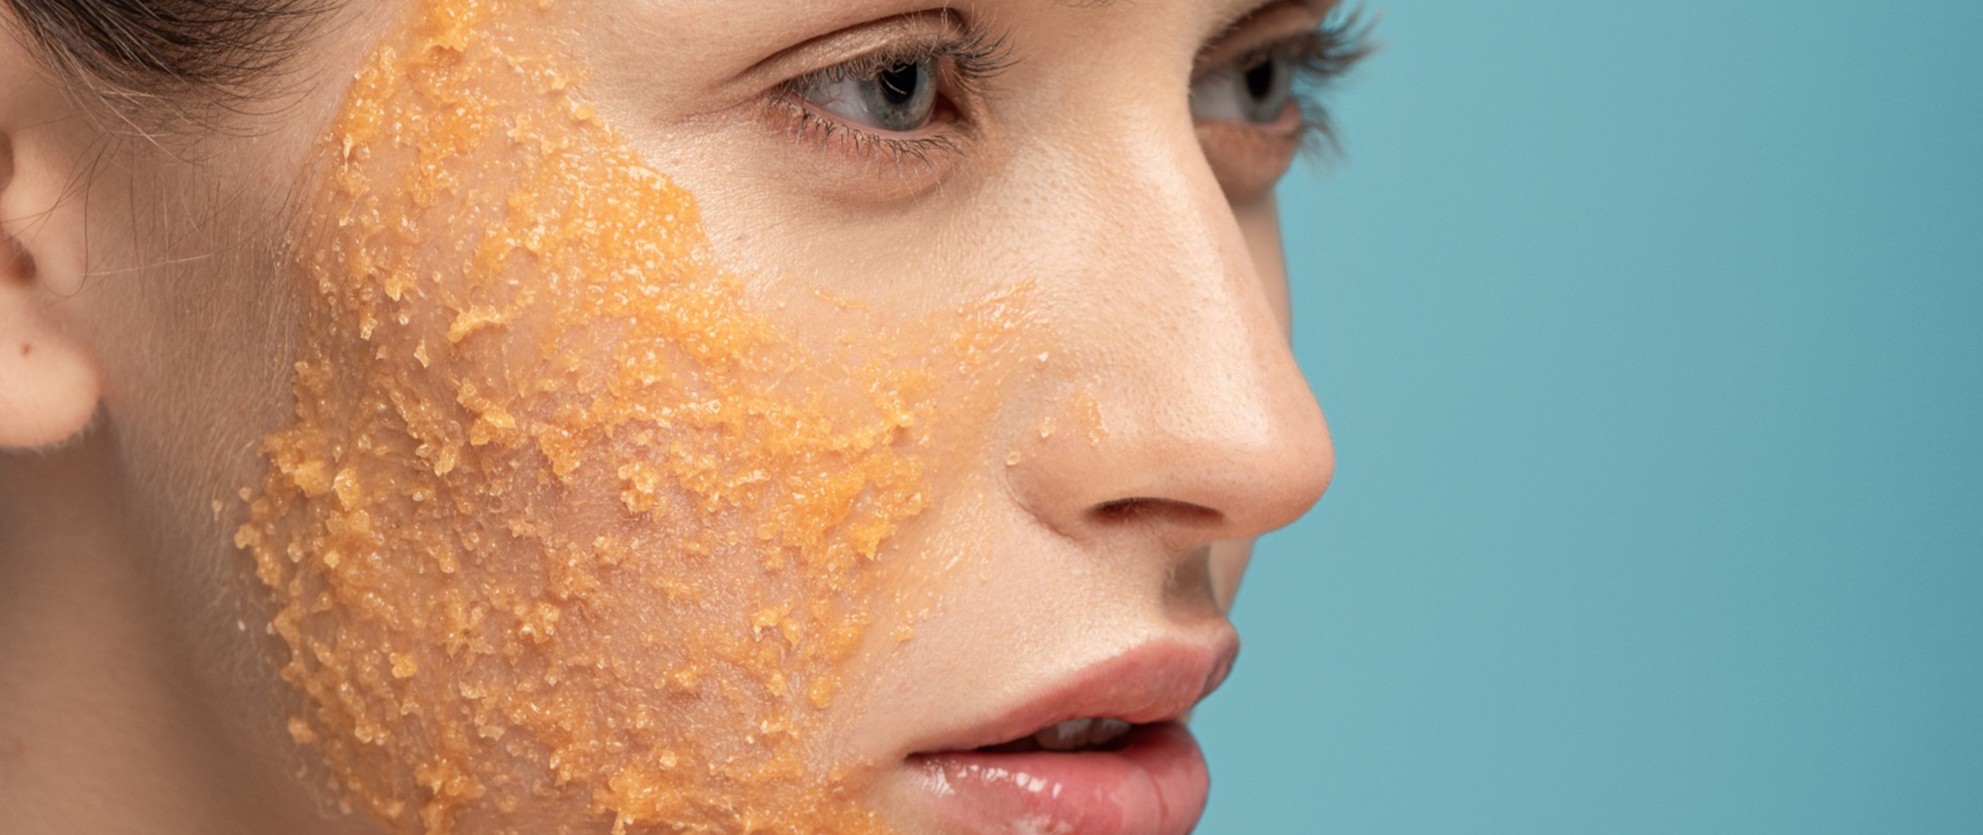 EXFOLIANTS AND FACIAL CLEANSING PRODUCTS